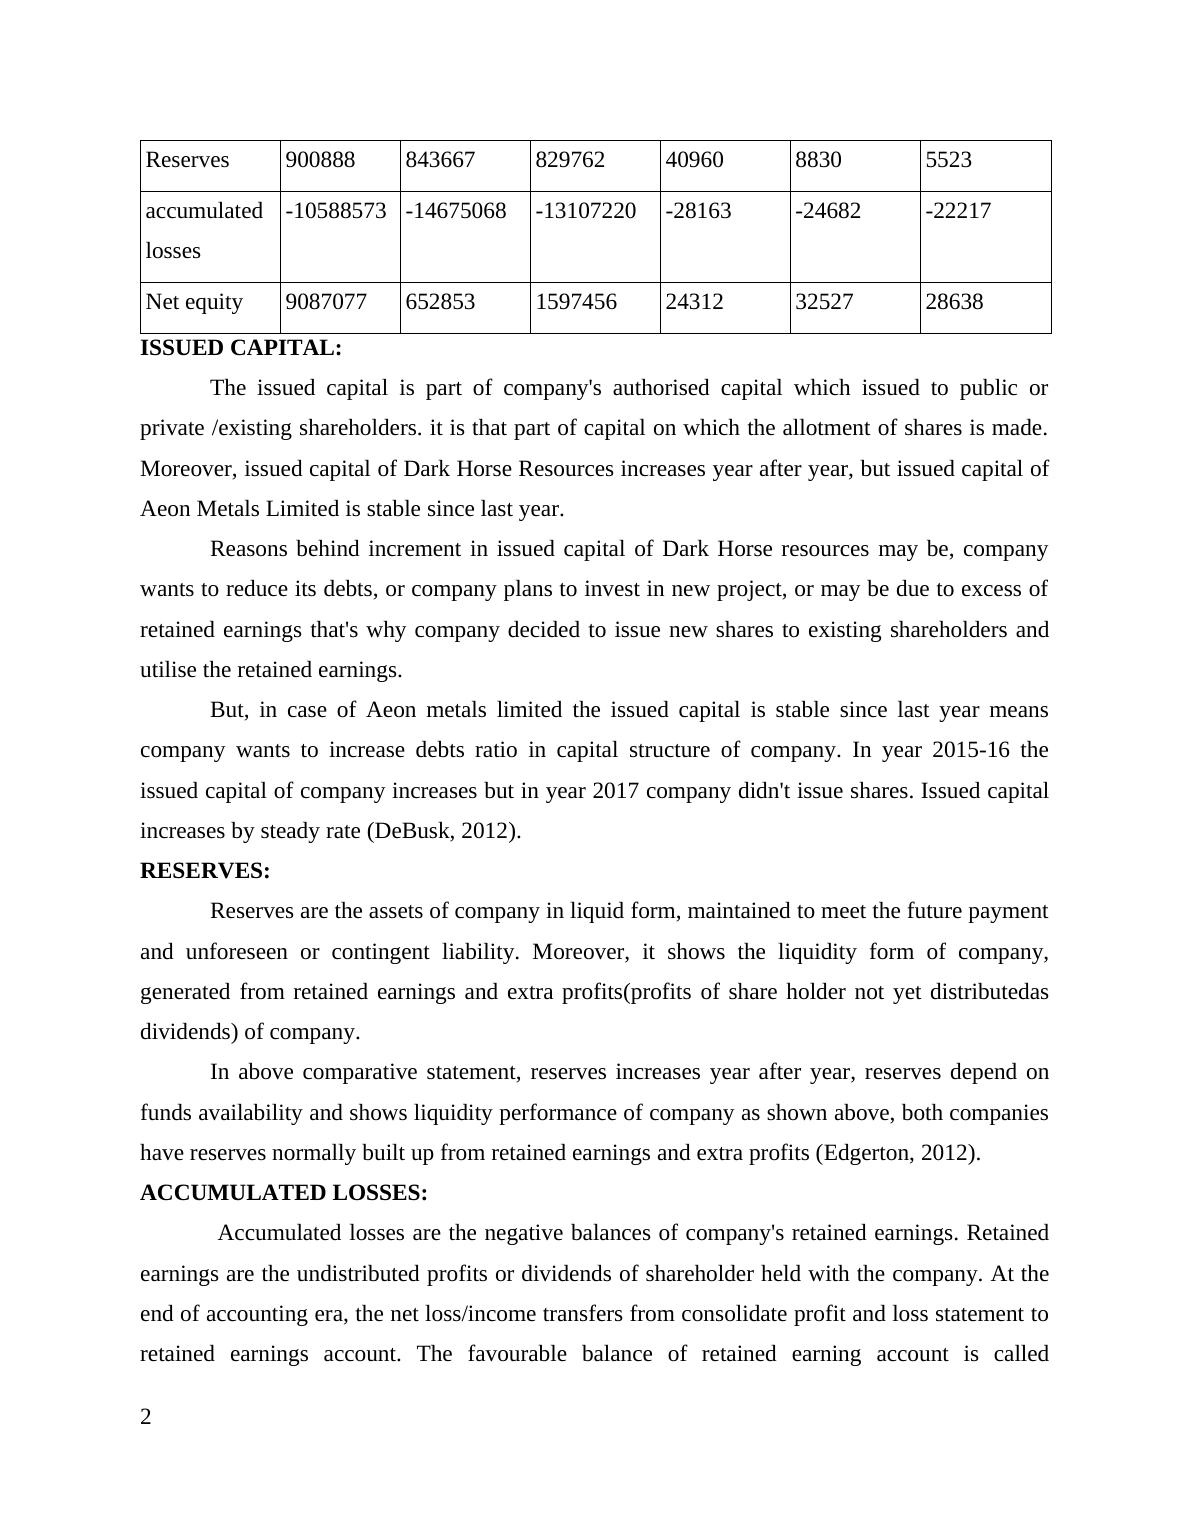 Comparative analysis of equity and debt position_4